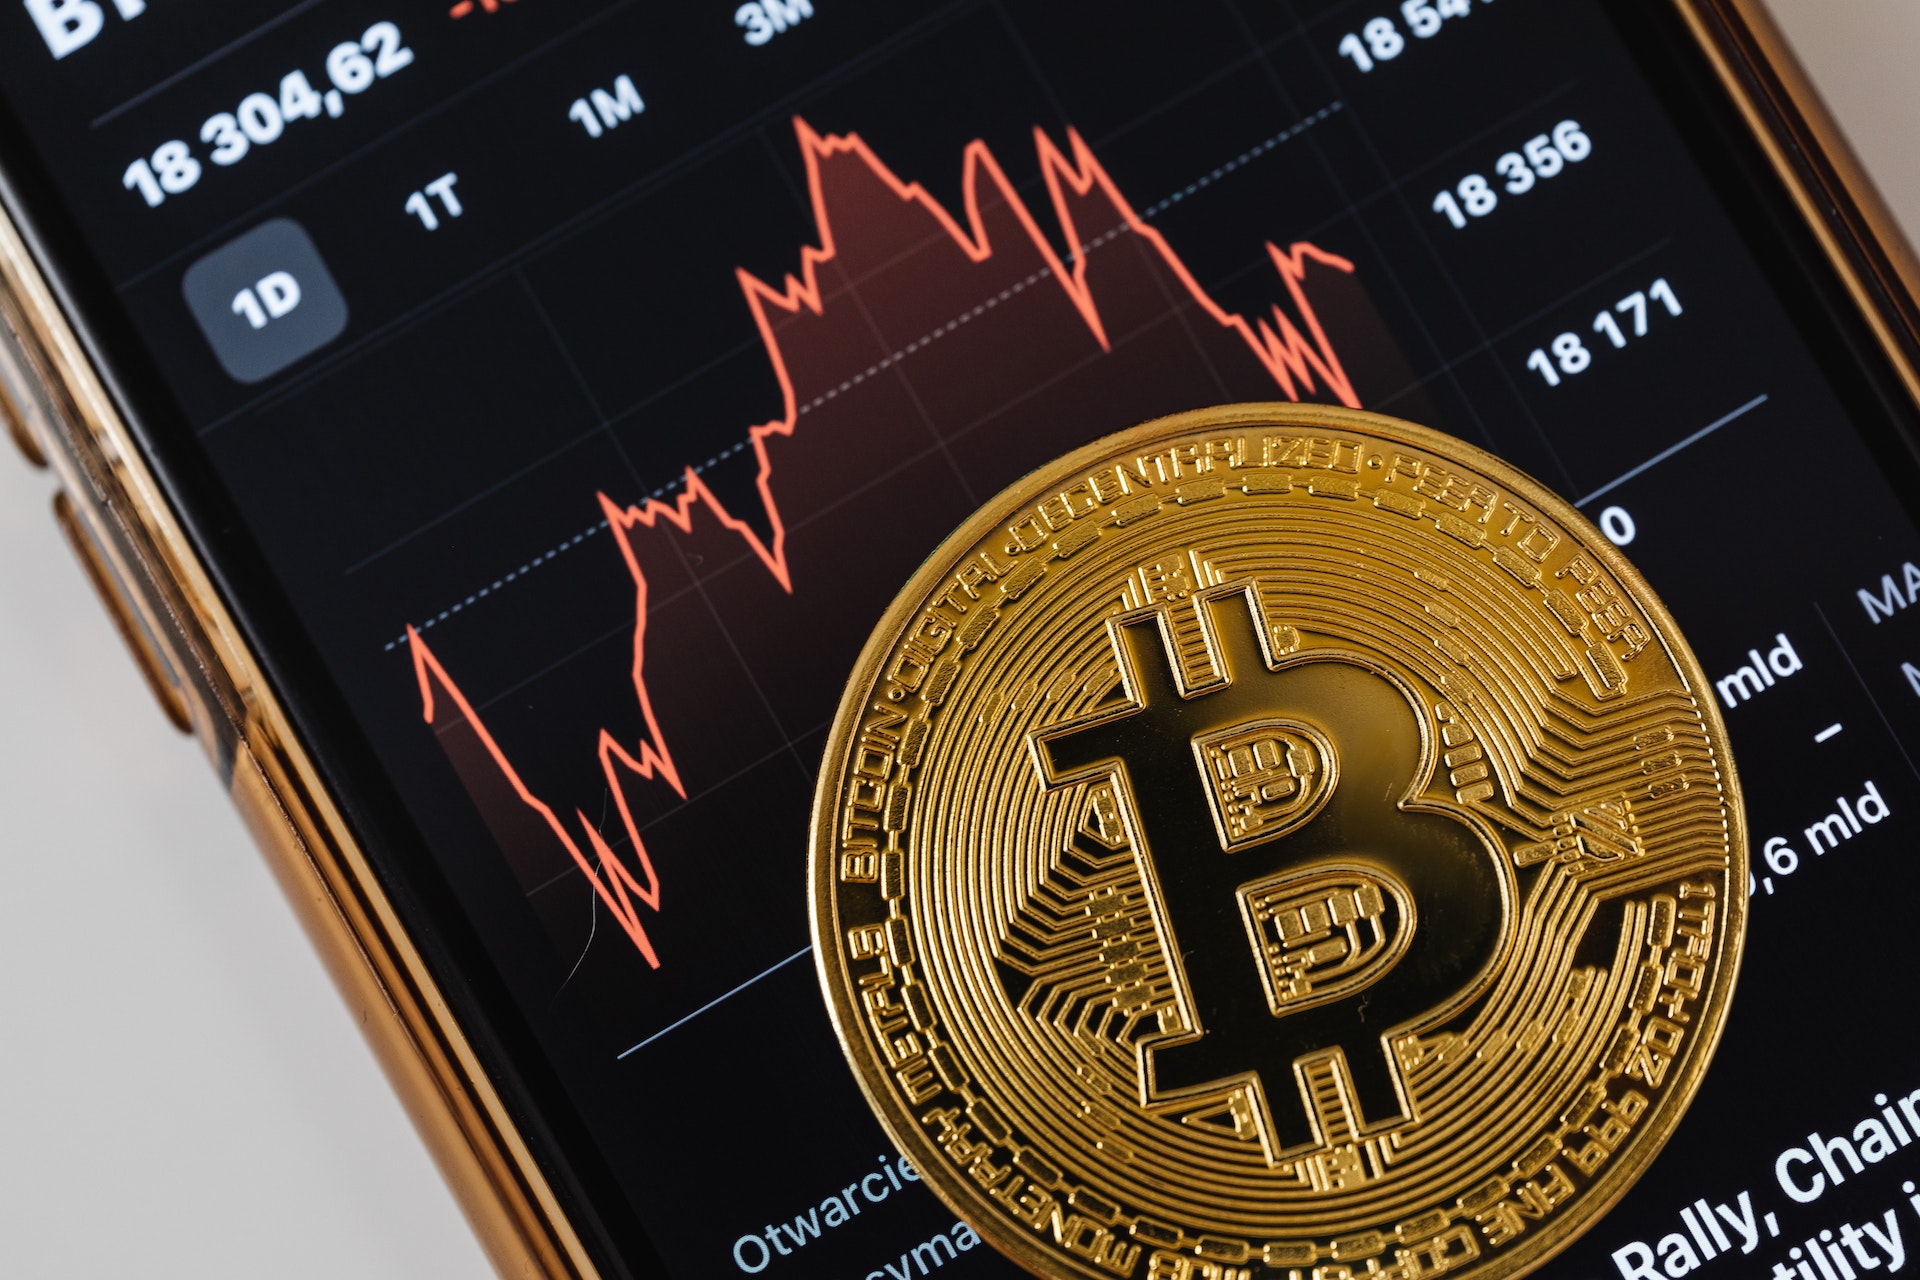 Bitcoin Forecast: There are signs of a reversal, but we cannot confirm that the bottom was reached